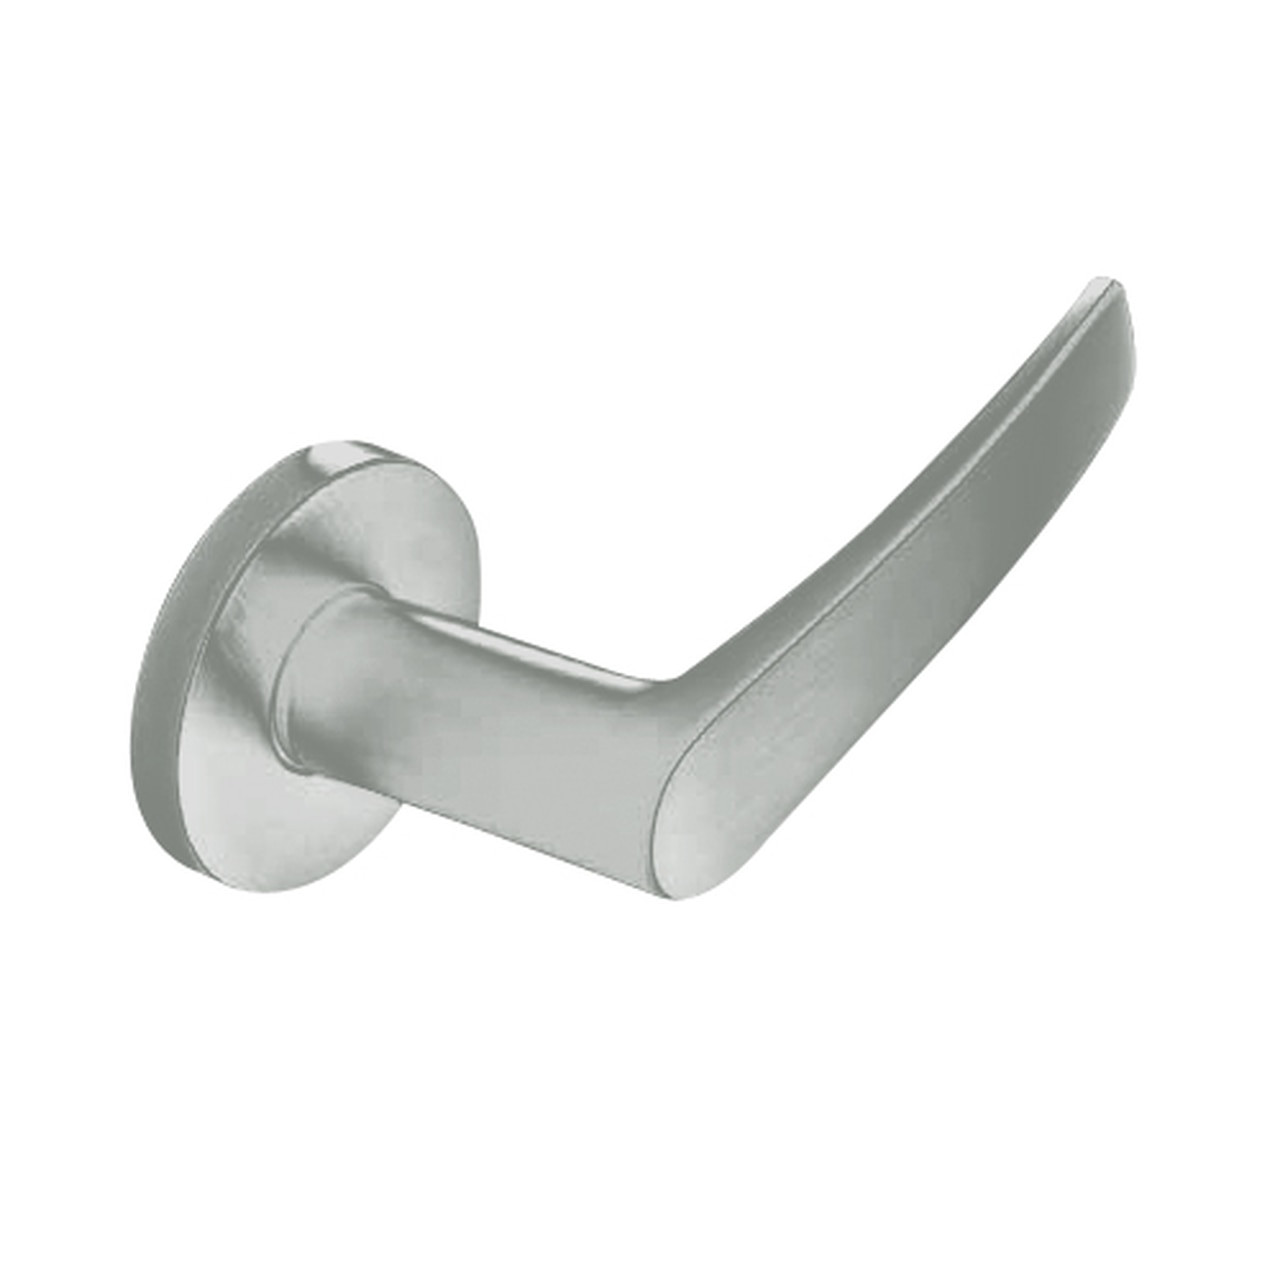 ML2065-ASB-619-LC Corbin Russwin ML2000 Series Mortise Dormitory Locksets with Armstrong Lever in Satin Nickel